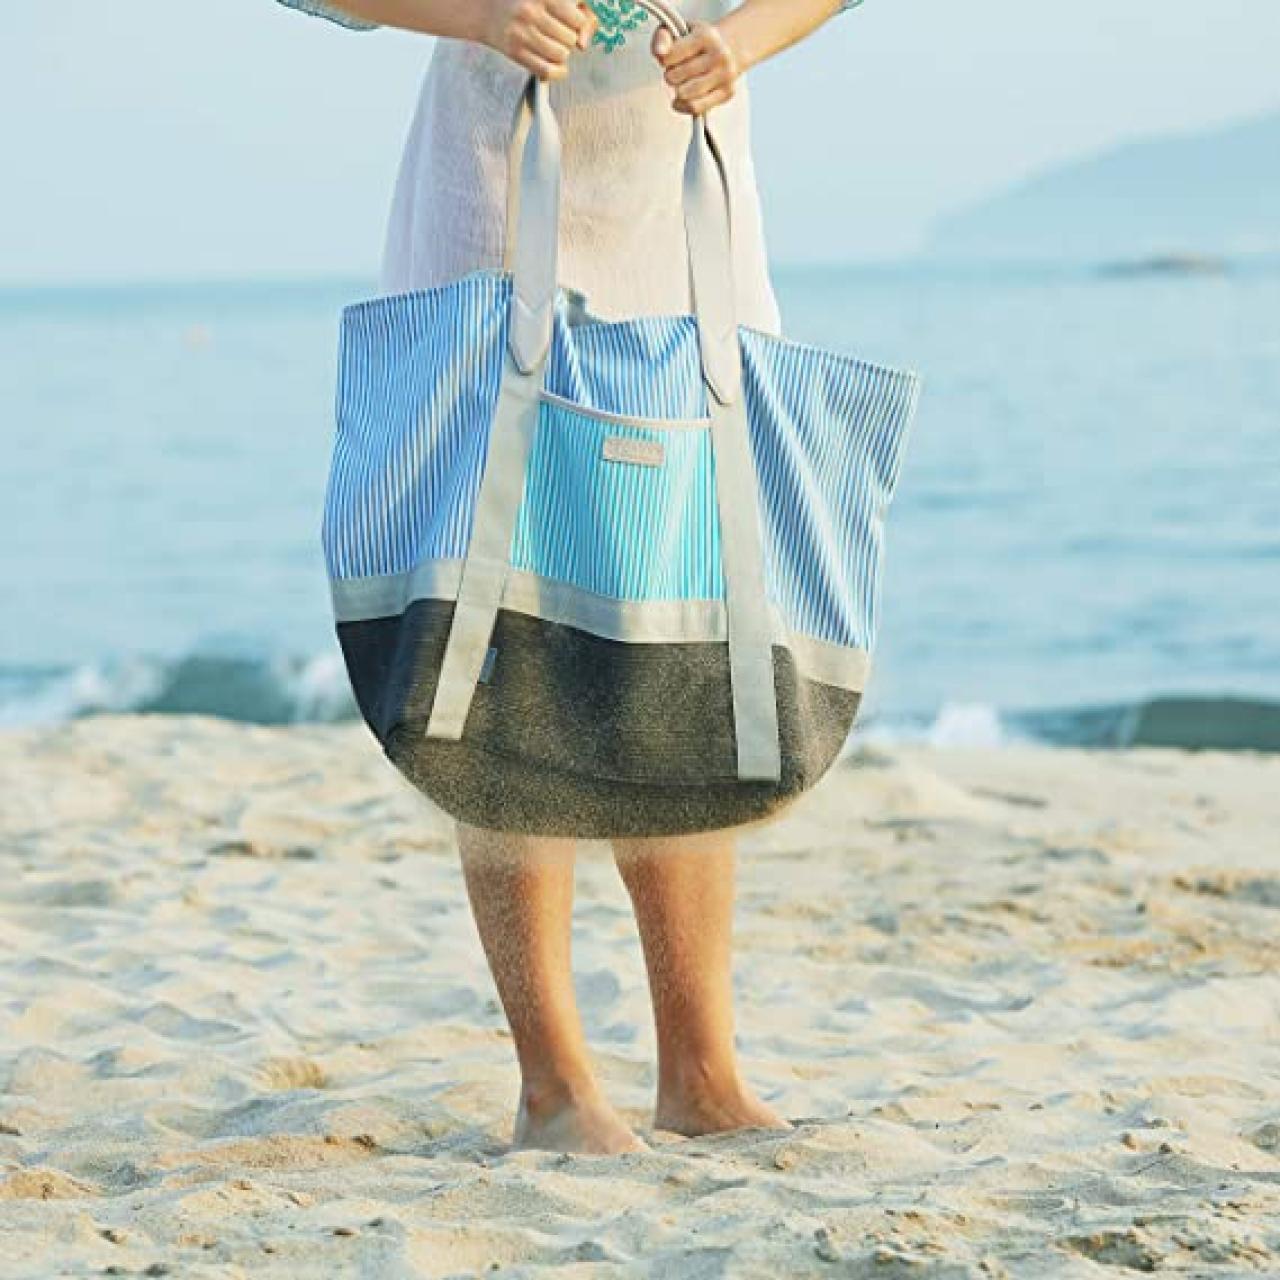 Shop the 8 Best Beach Tote Bags for Spring Break Starting at $10